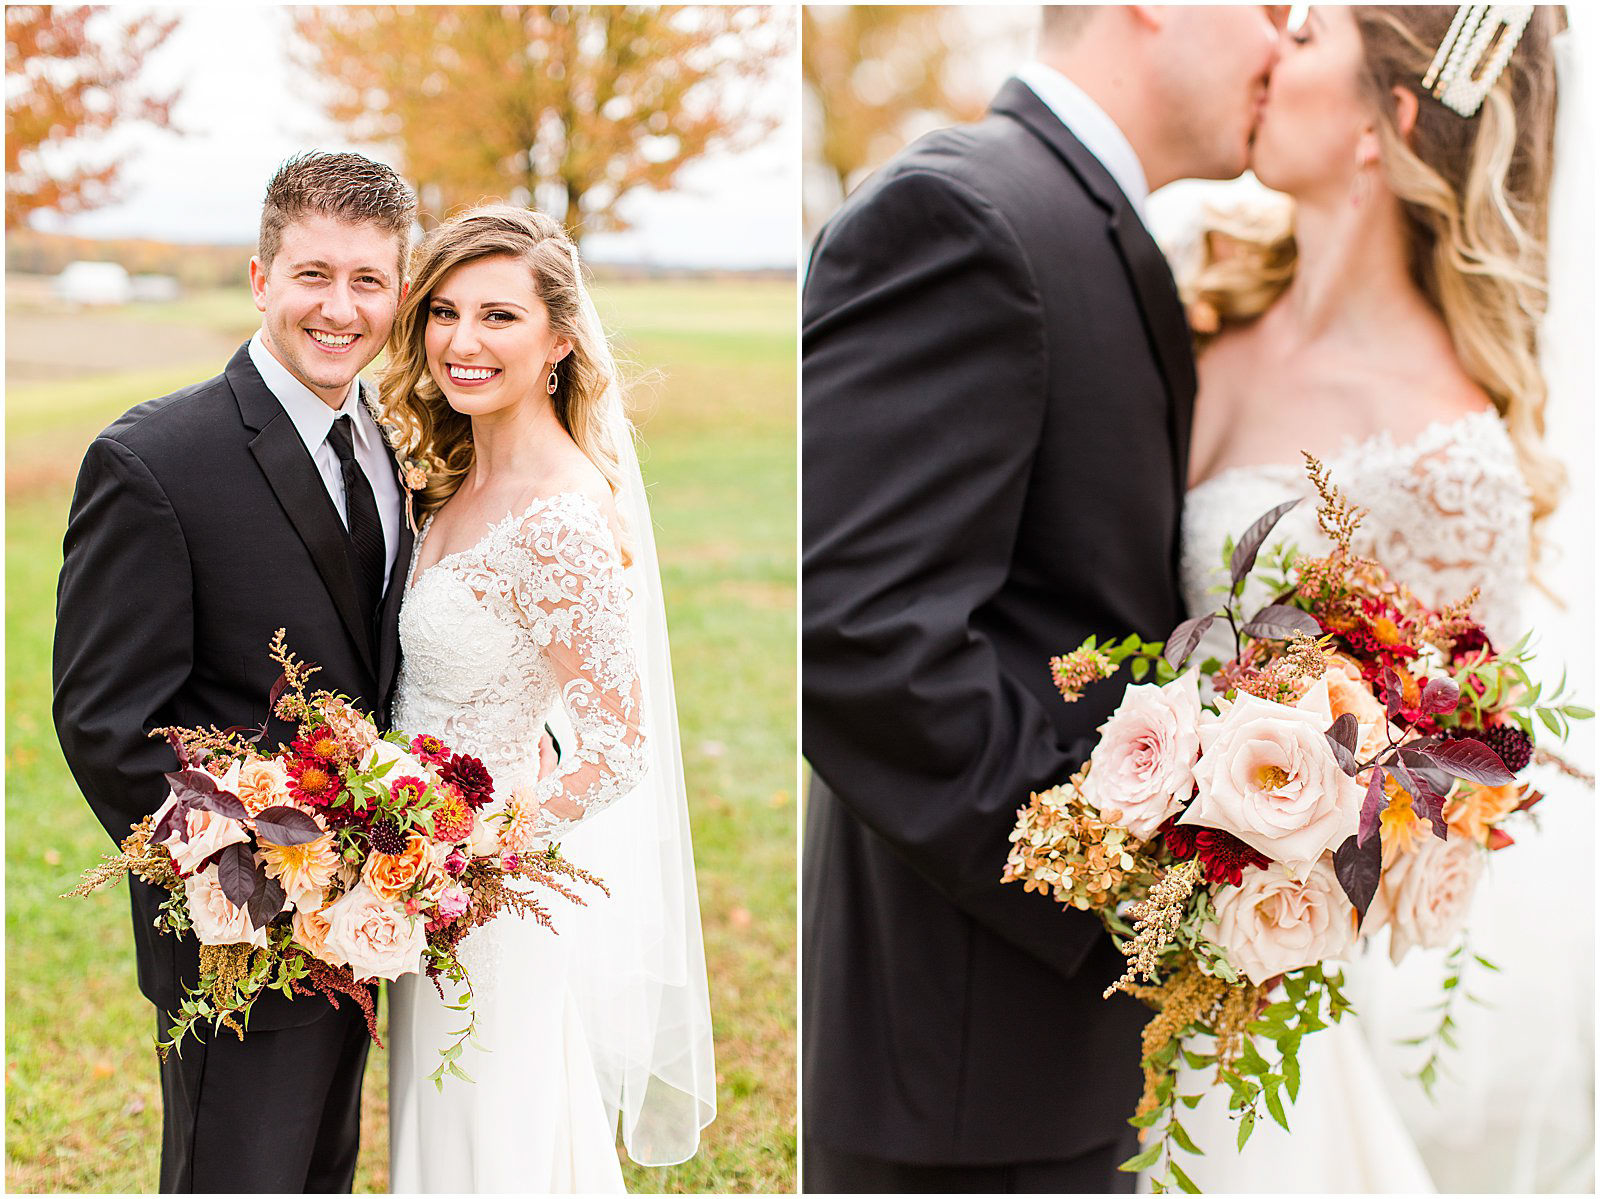 A Romantic Fall Wedding in Ferdinand, IN | Tori and Kyle | Bret and Brandie Photography 0060.jpg